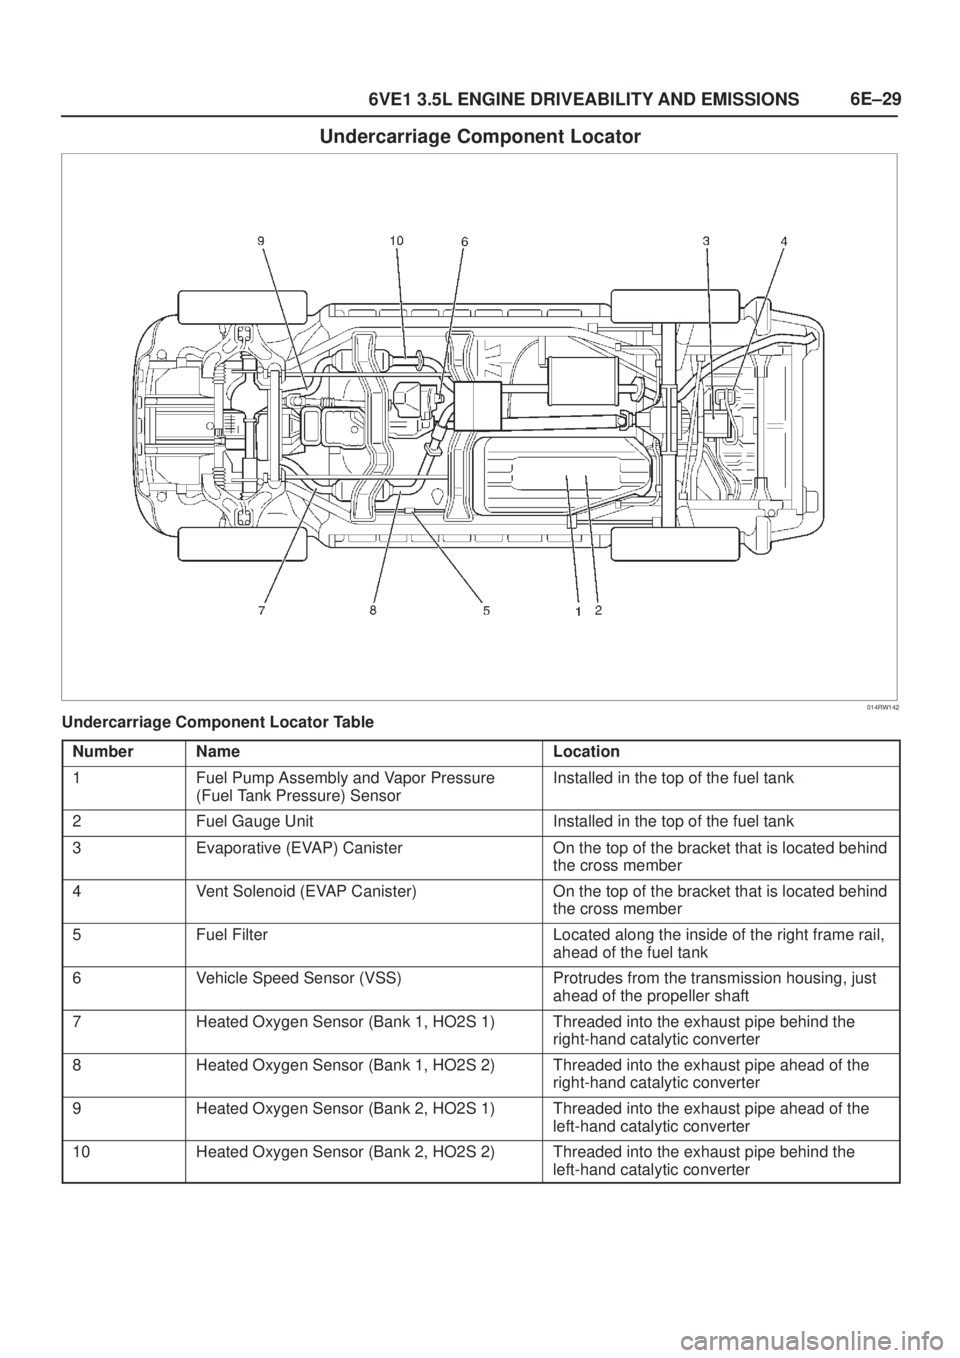 ISUZU AXIOM 2002  Service Repair Manual 6E±29
6VE1 3.5L ENGINE DRIVEABILITY AND EMISSIONS
Undercarriage Component Locator
014RW142
Undercarriage Component Locator Table
Number
NameLocation
1Fuel Pump Assembly and Vapor Pressure
(Fuel Tank 